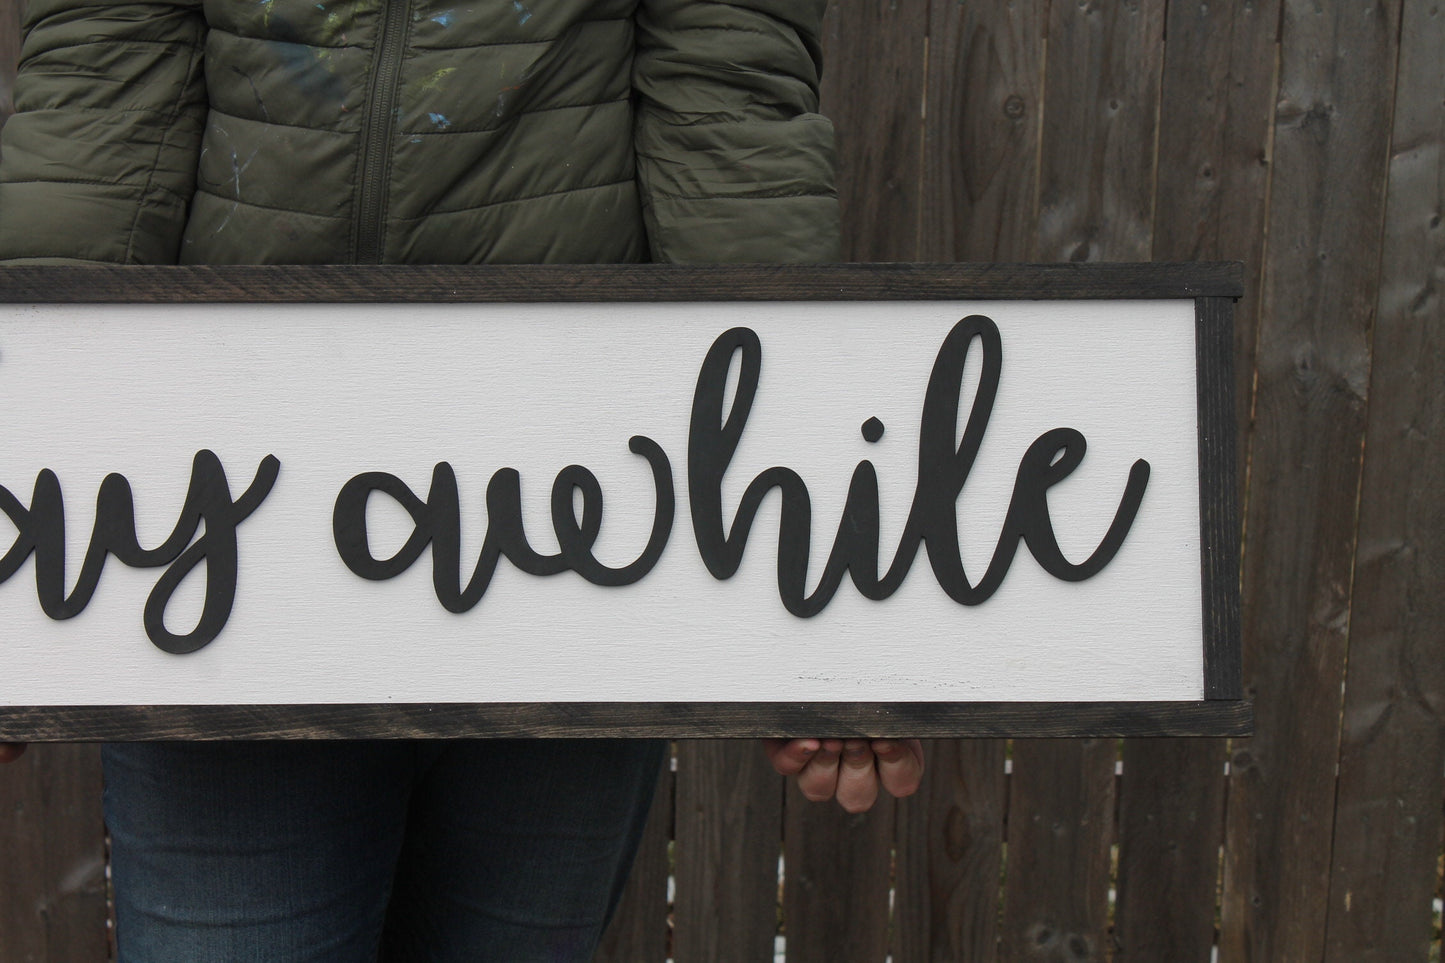 Stay Awhile, Guest Room Sign, Bed Sign, Couch Sign, Large, Over Sized Rustic, Primitive, Shabby Chic, Raised Text, 3D, Wood